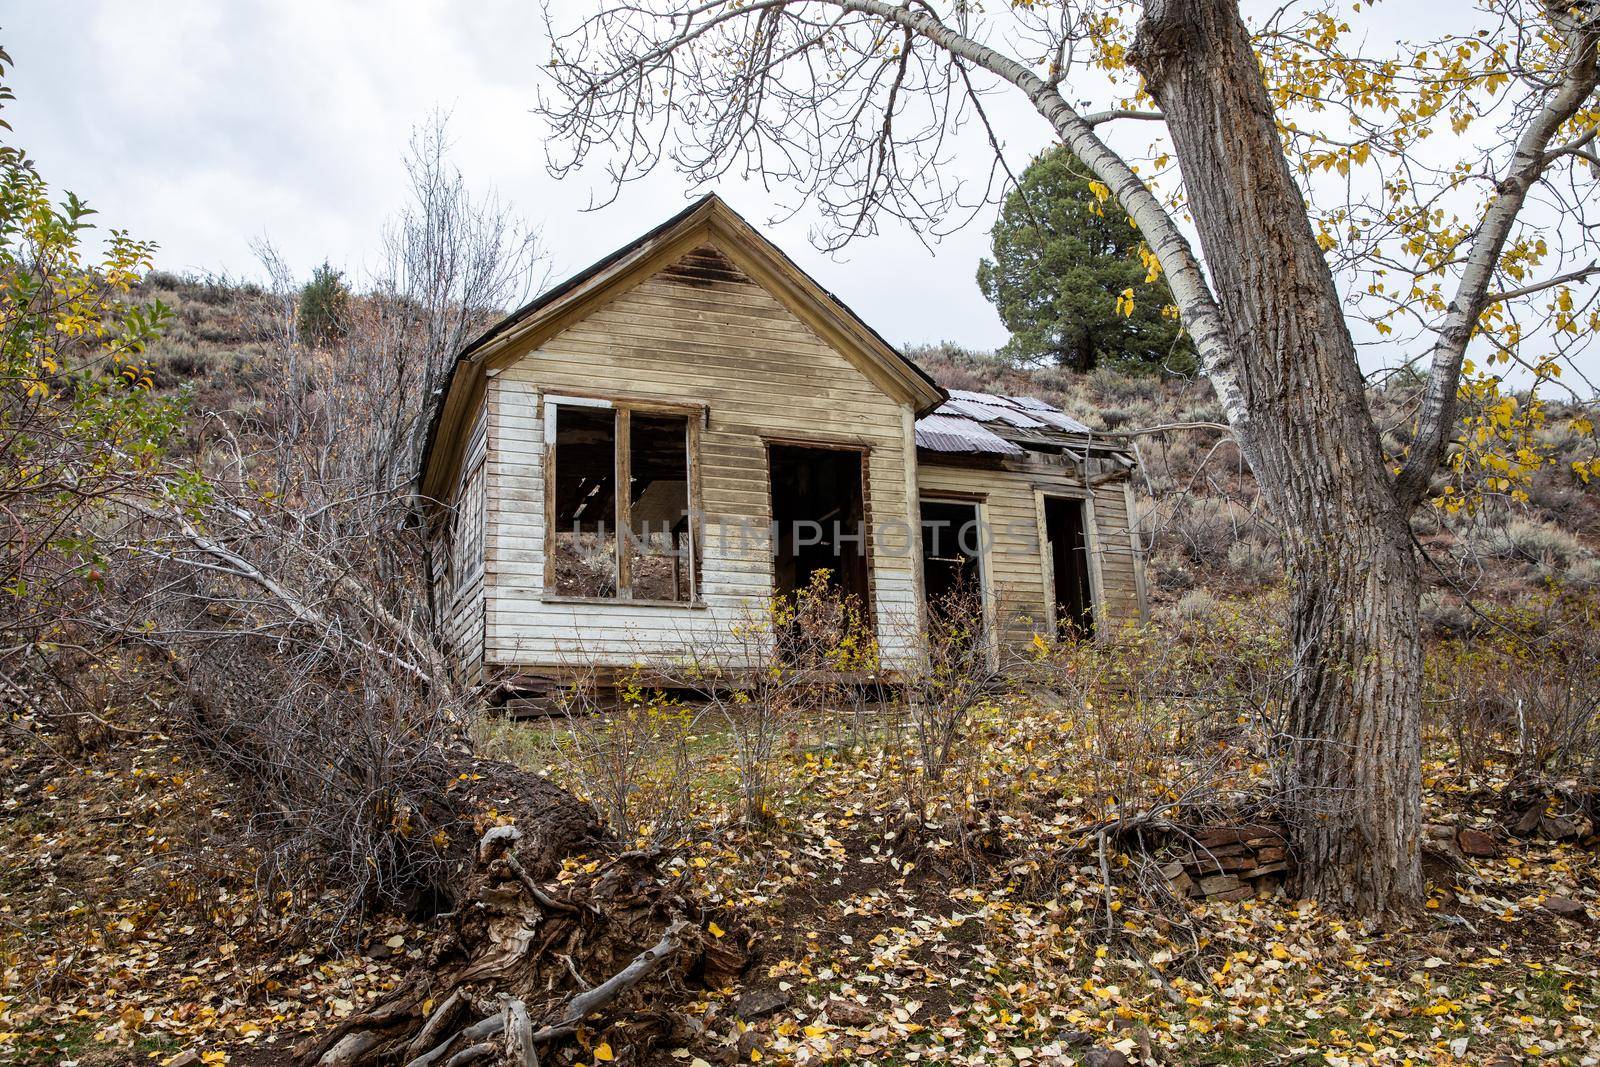 Old house in the mountains that has seen better days